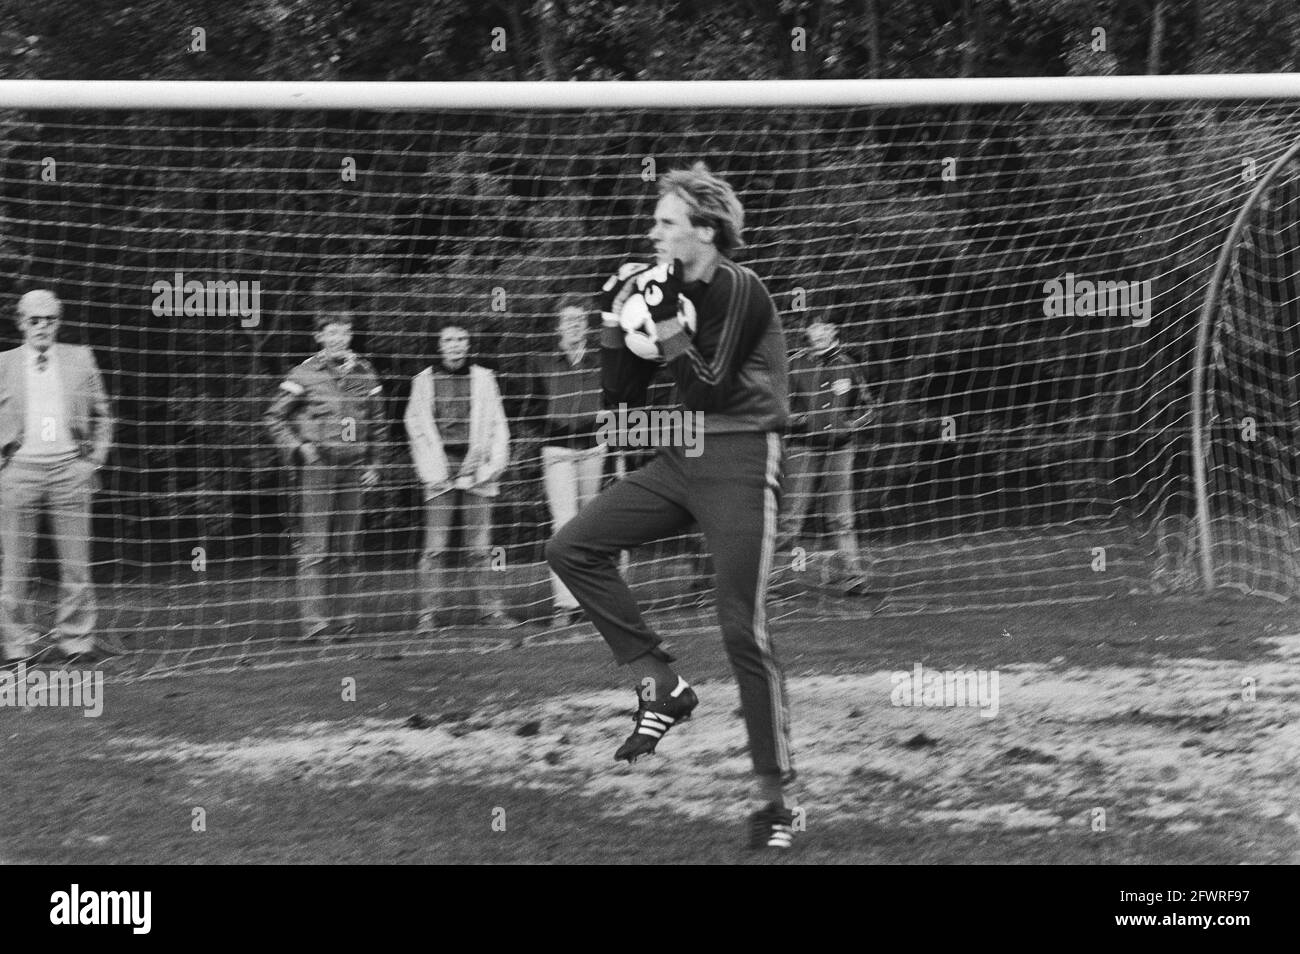 Dutch national team trained this afternoon in Zeist in connection with the international game against West Germany goalkeeper Hans van Breukelen training, October 9, 1980, teams, goalkeepers, sports, training, soccer, The Netherlands, 20th century press agency photo, news to remember, documentary, historic photography 1945-1990, visual stories, human history of the Twentieth Century, capturing moments in time Stock Photo